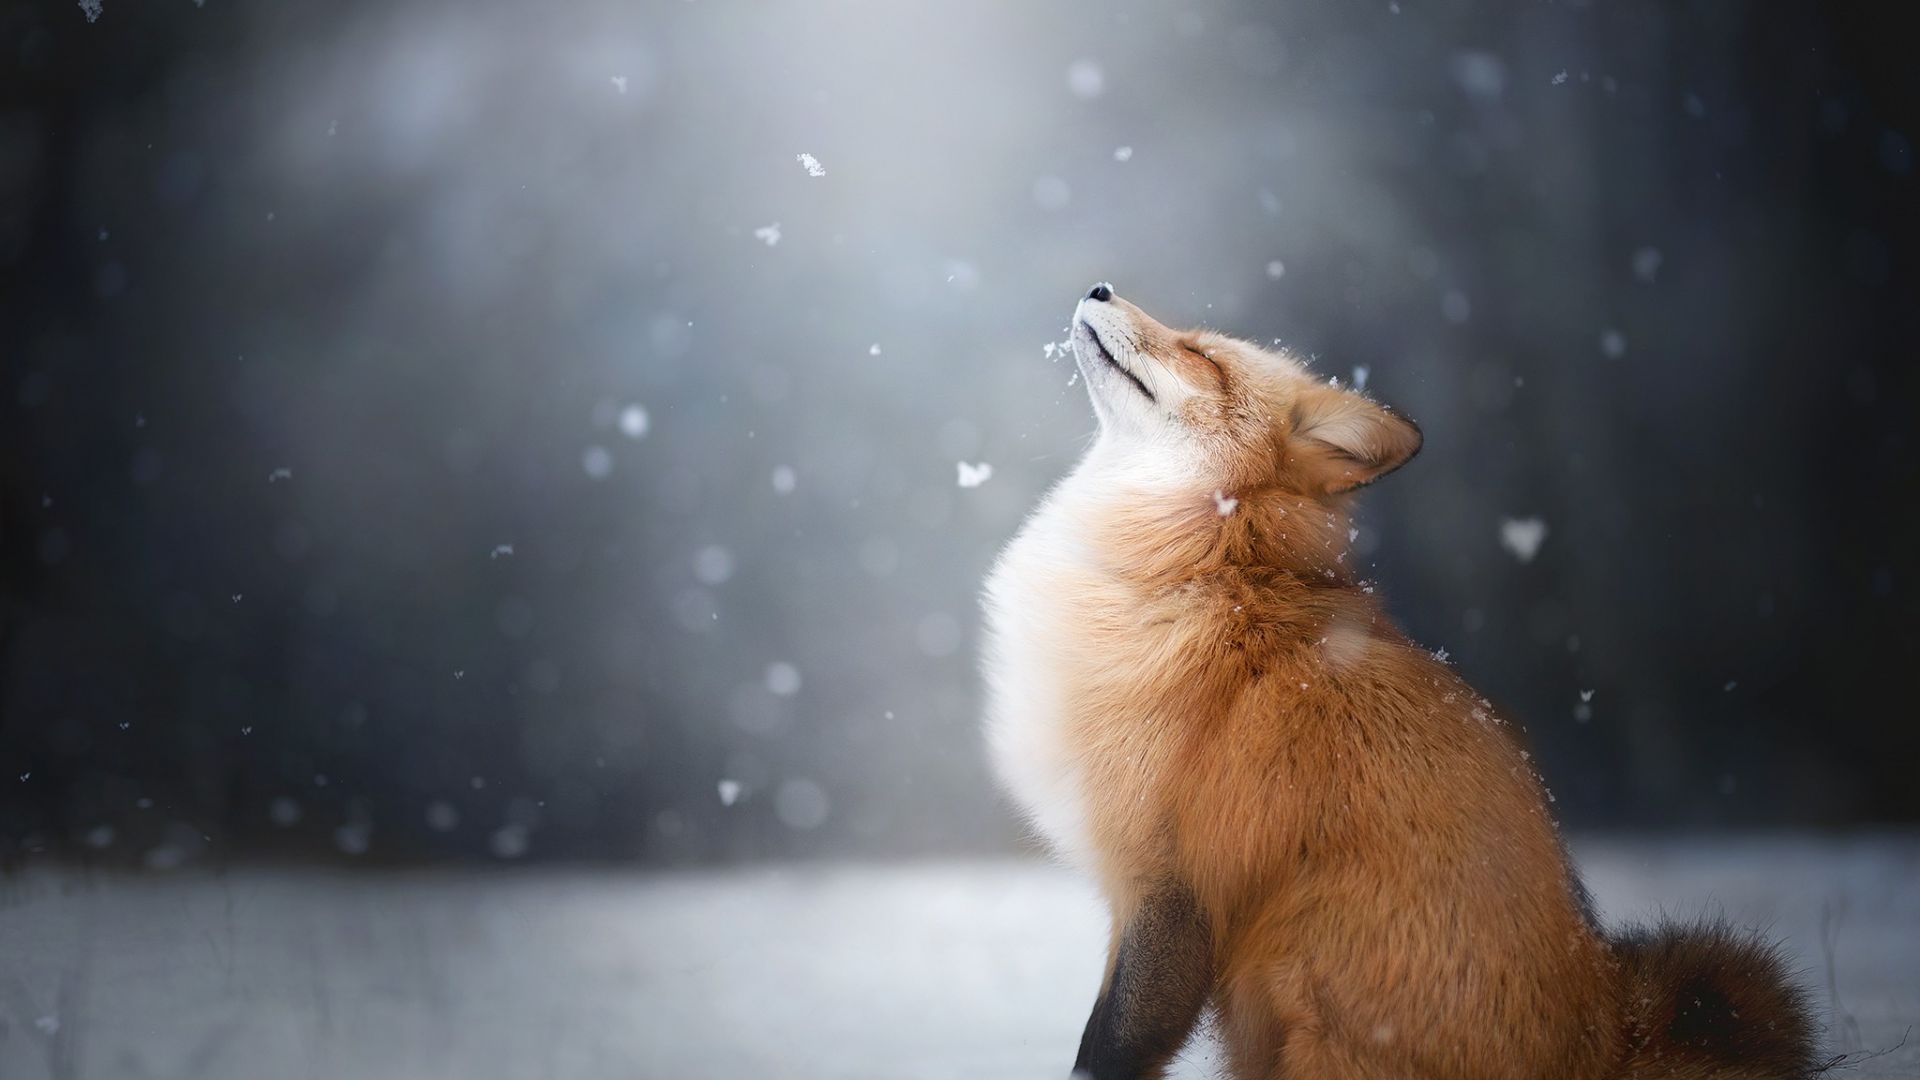 Wallpaper Happiness of red fox, furry animal, winter